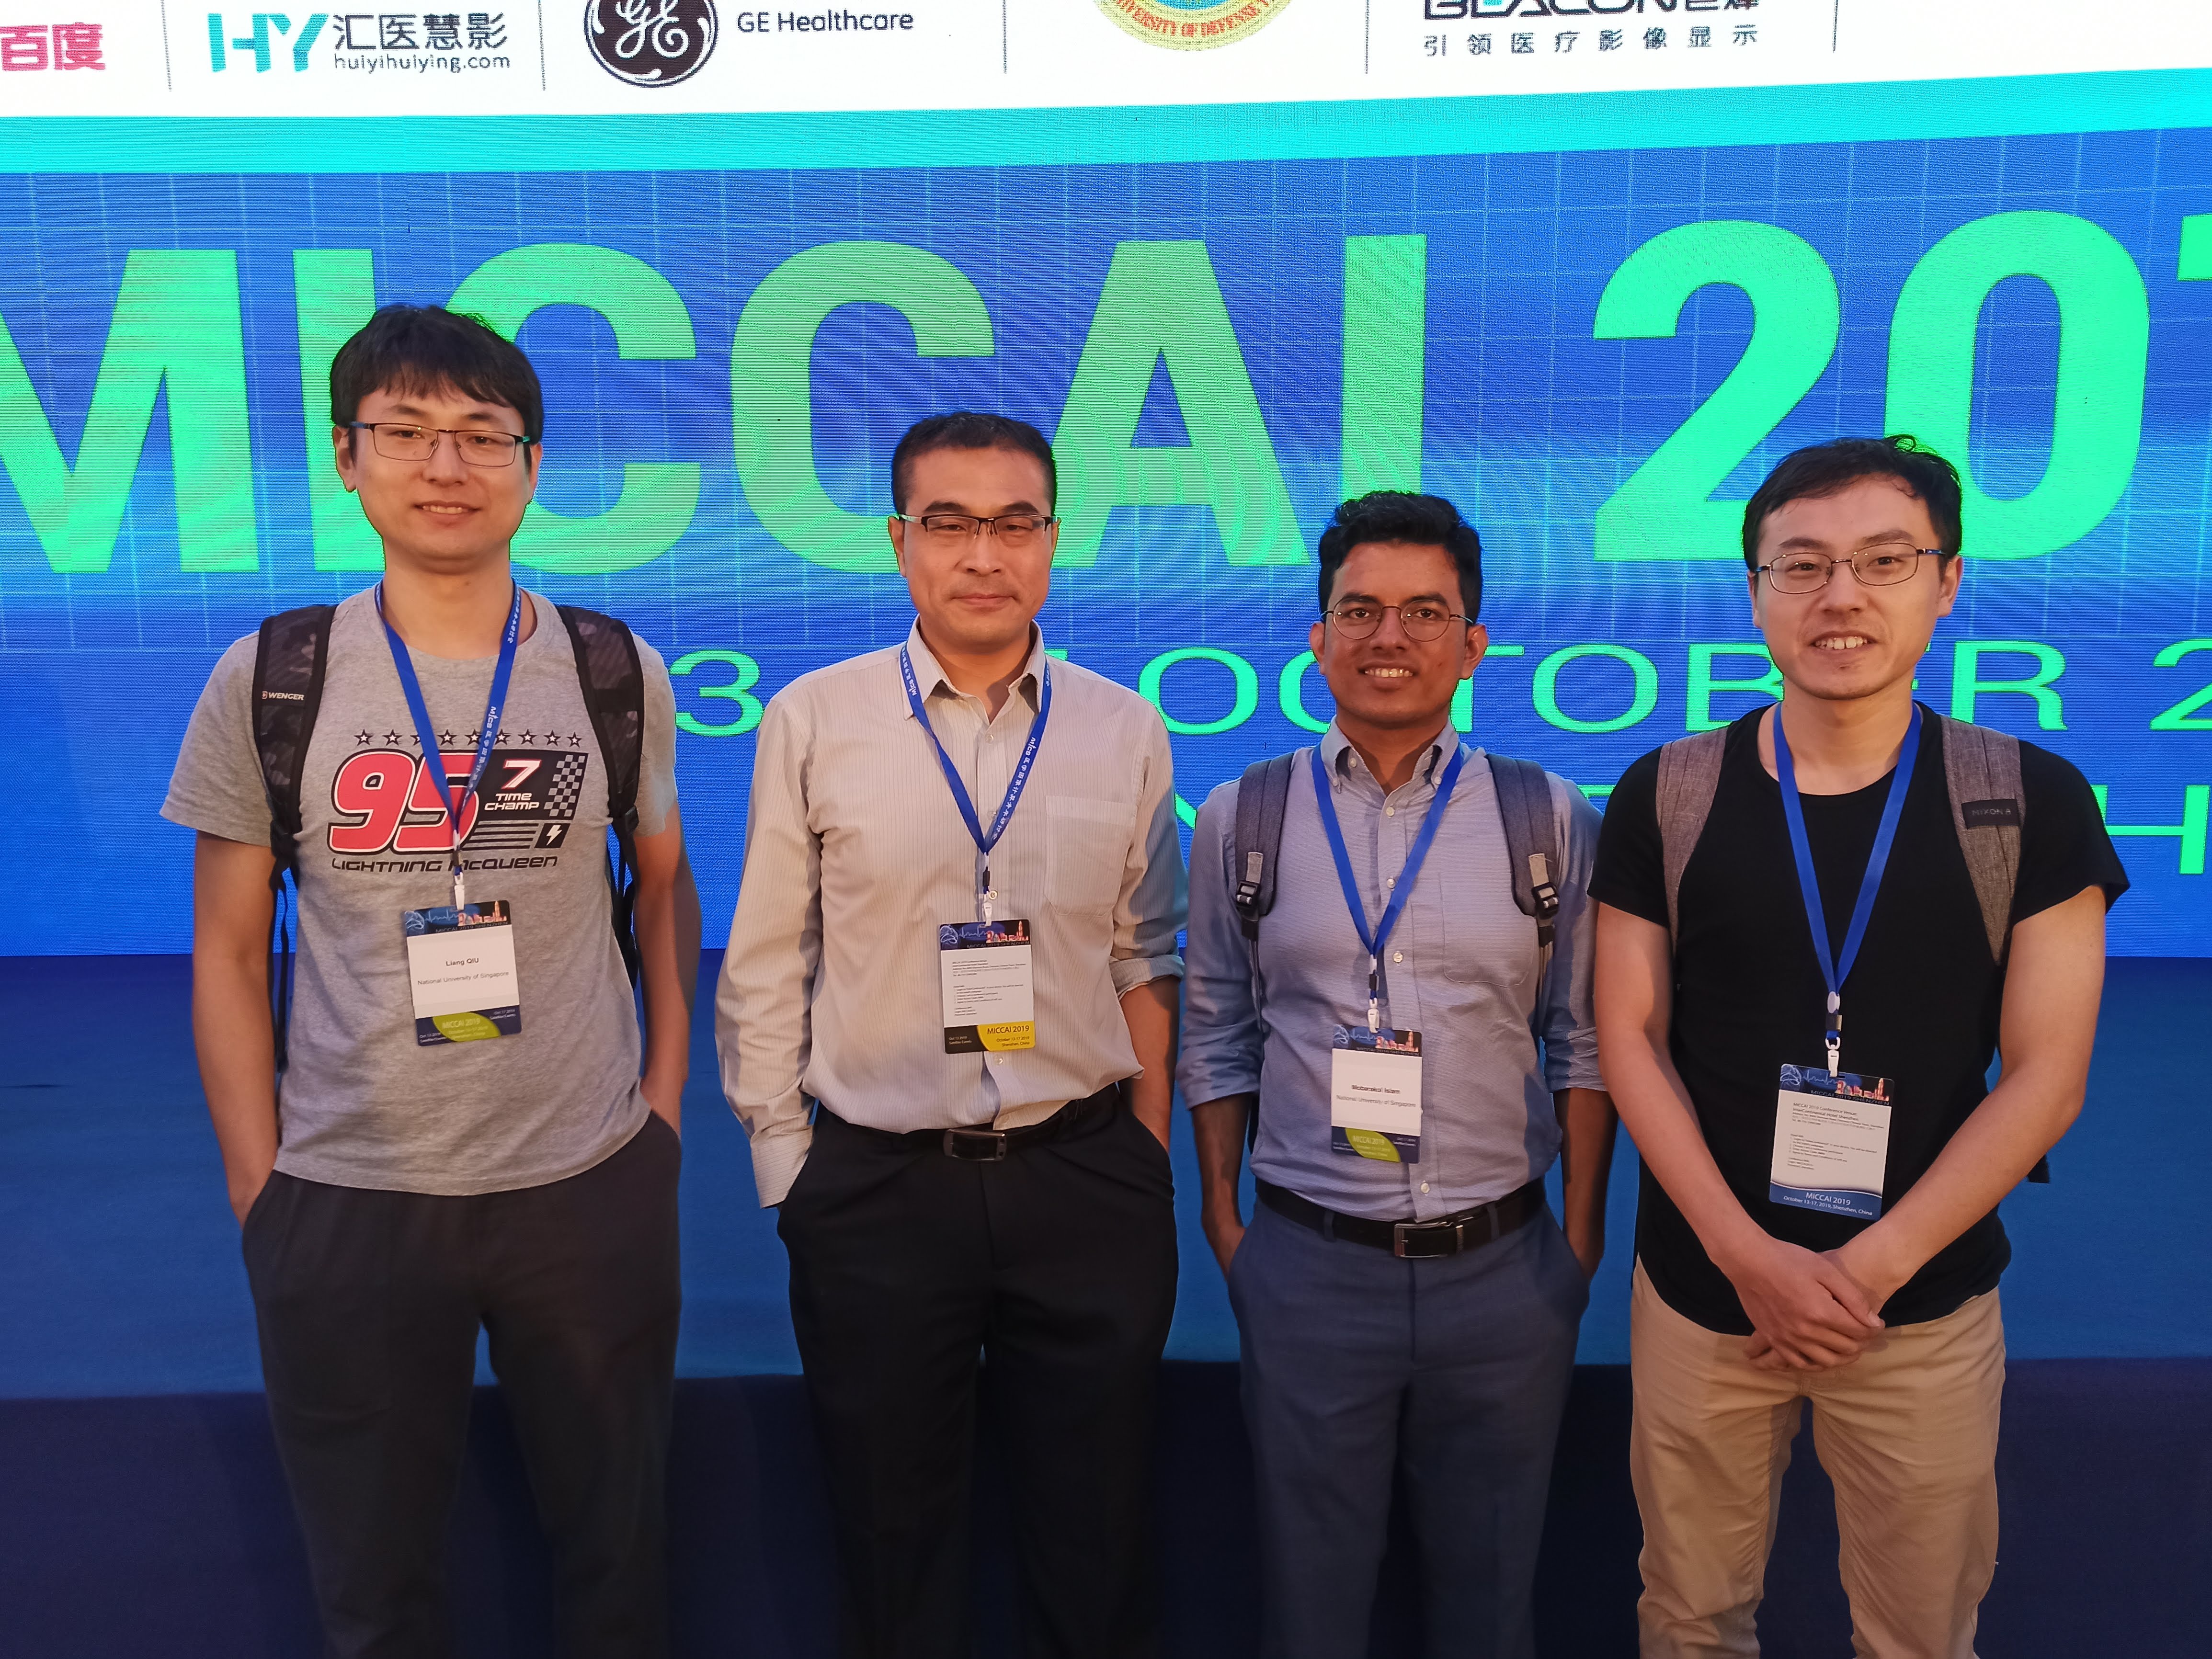 Our team papers presented at MICCAI 2019